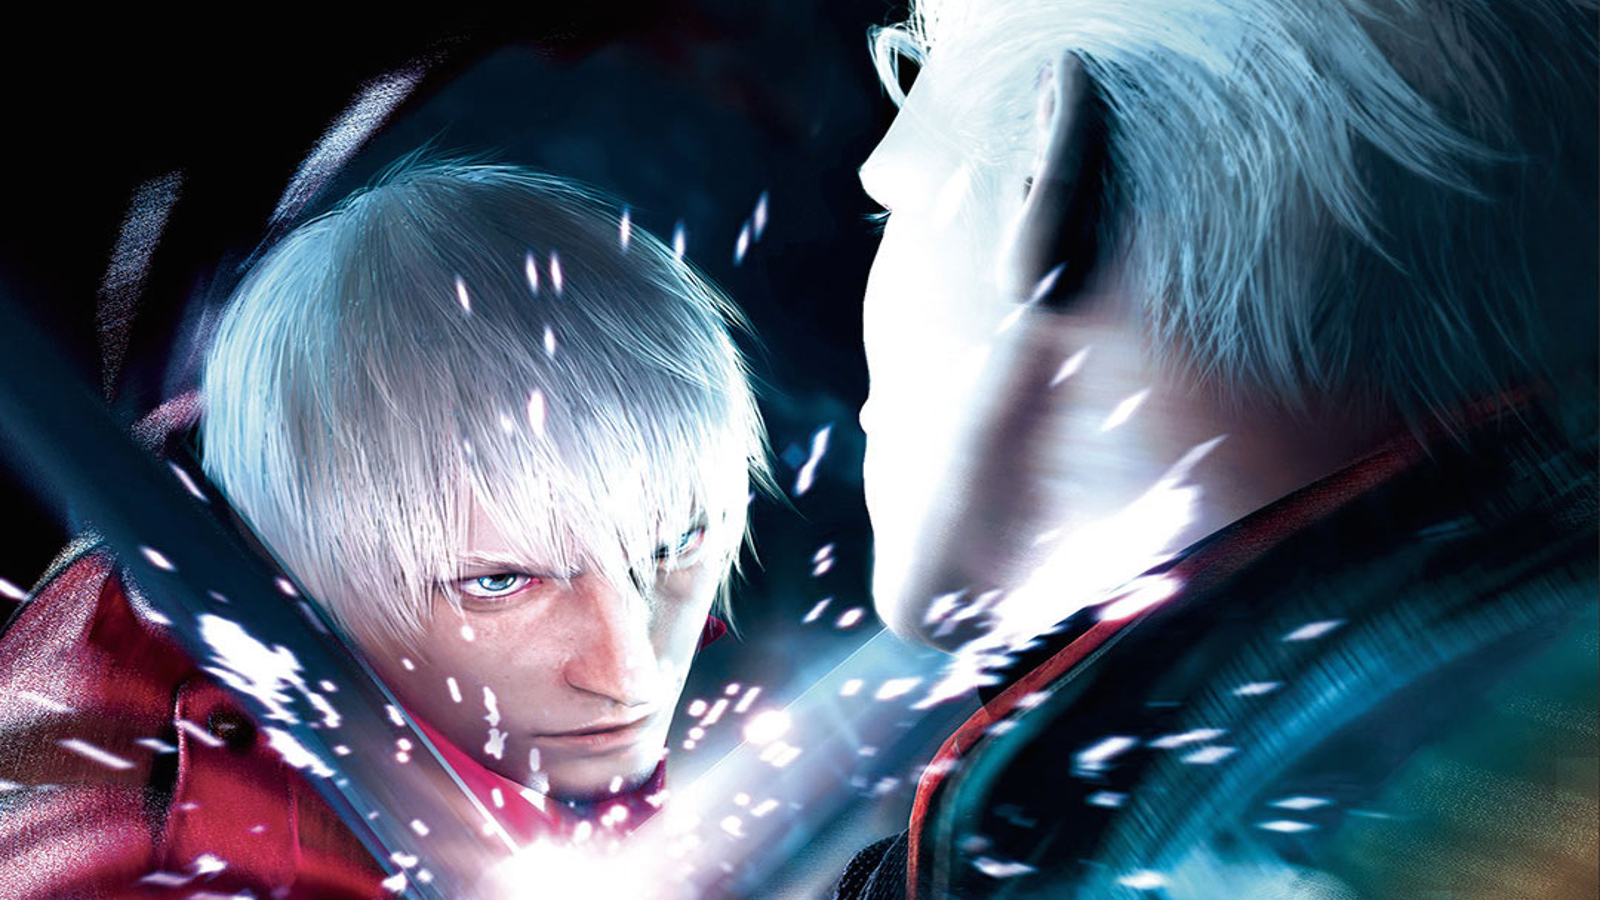 If Devil May Cry 3 Hadn't Been a Huge Success, Its Development